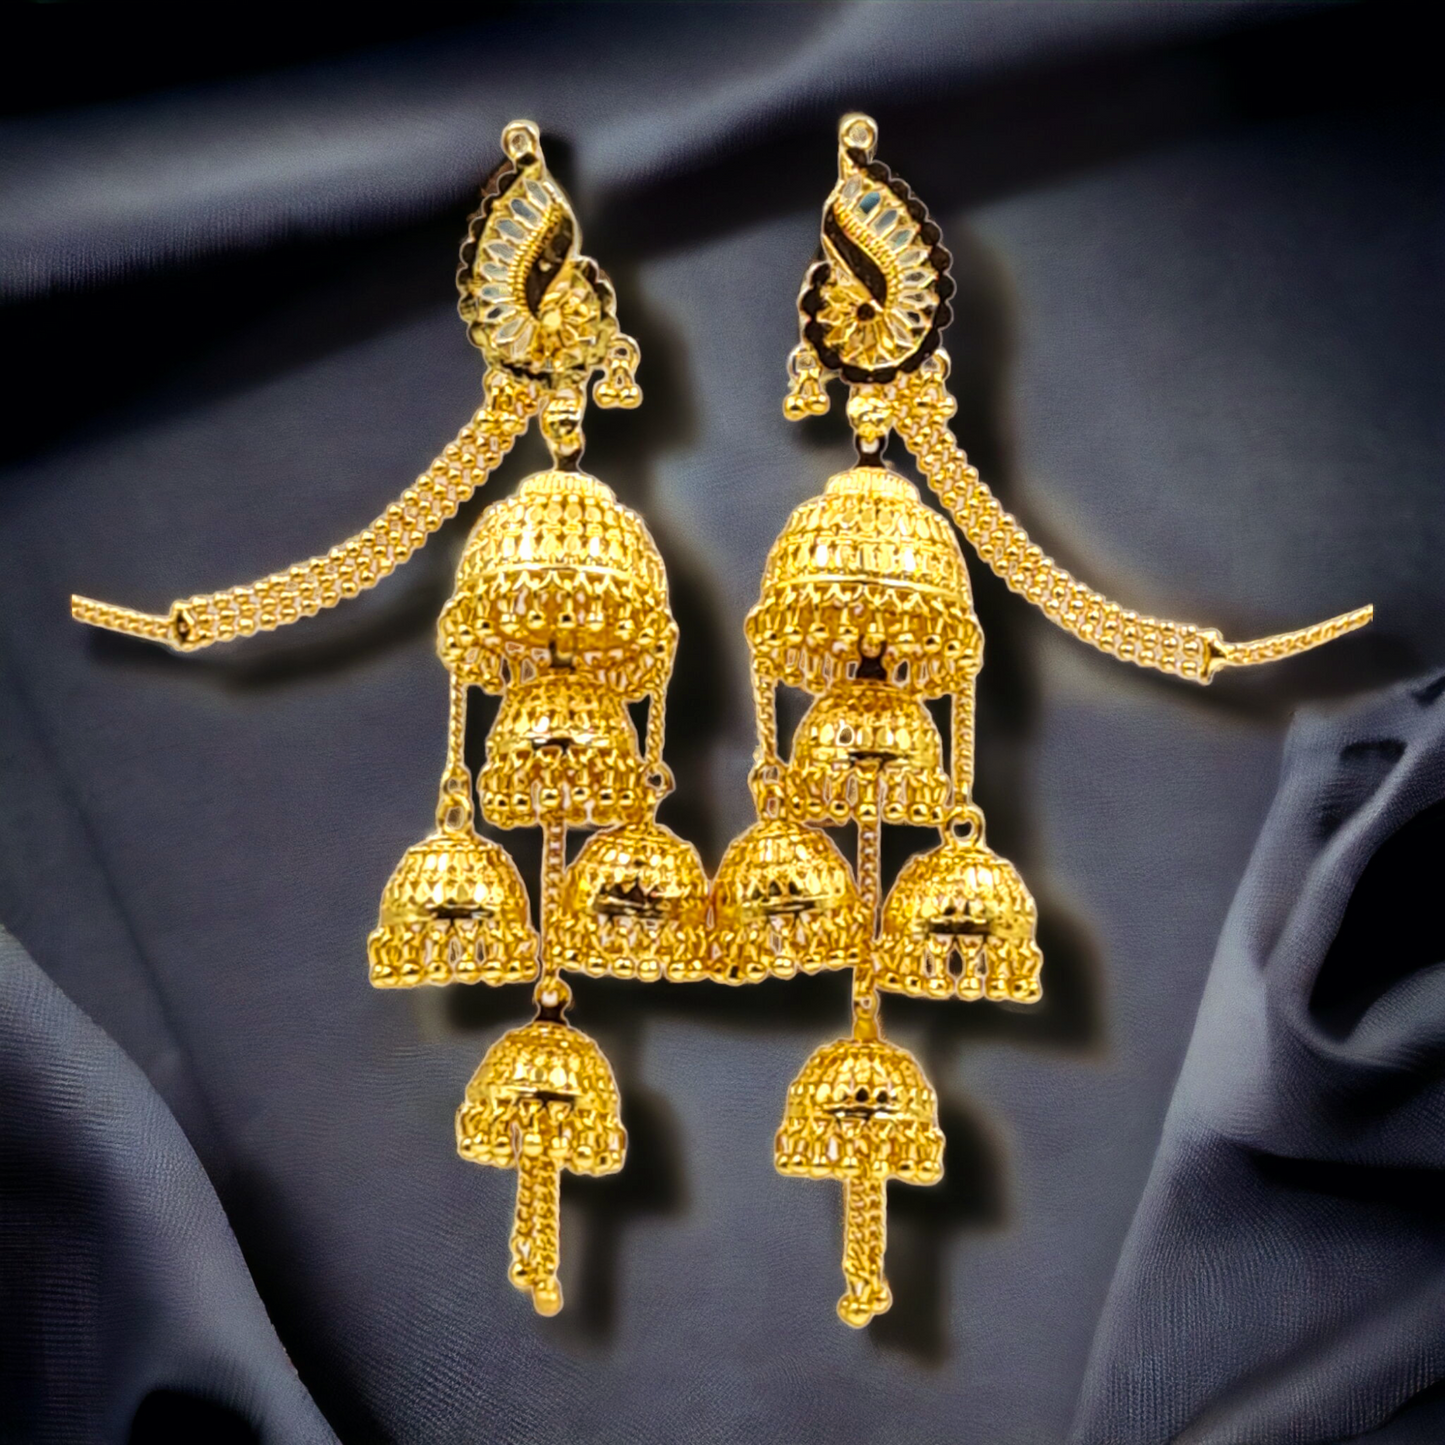 "Dazzling Craftsmanship: Gold-Plated Earrings with Crystal Beauty"